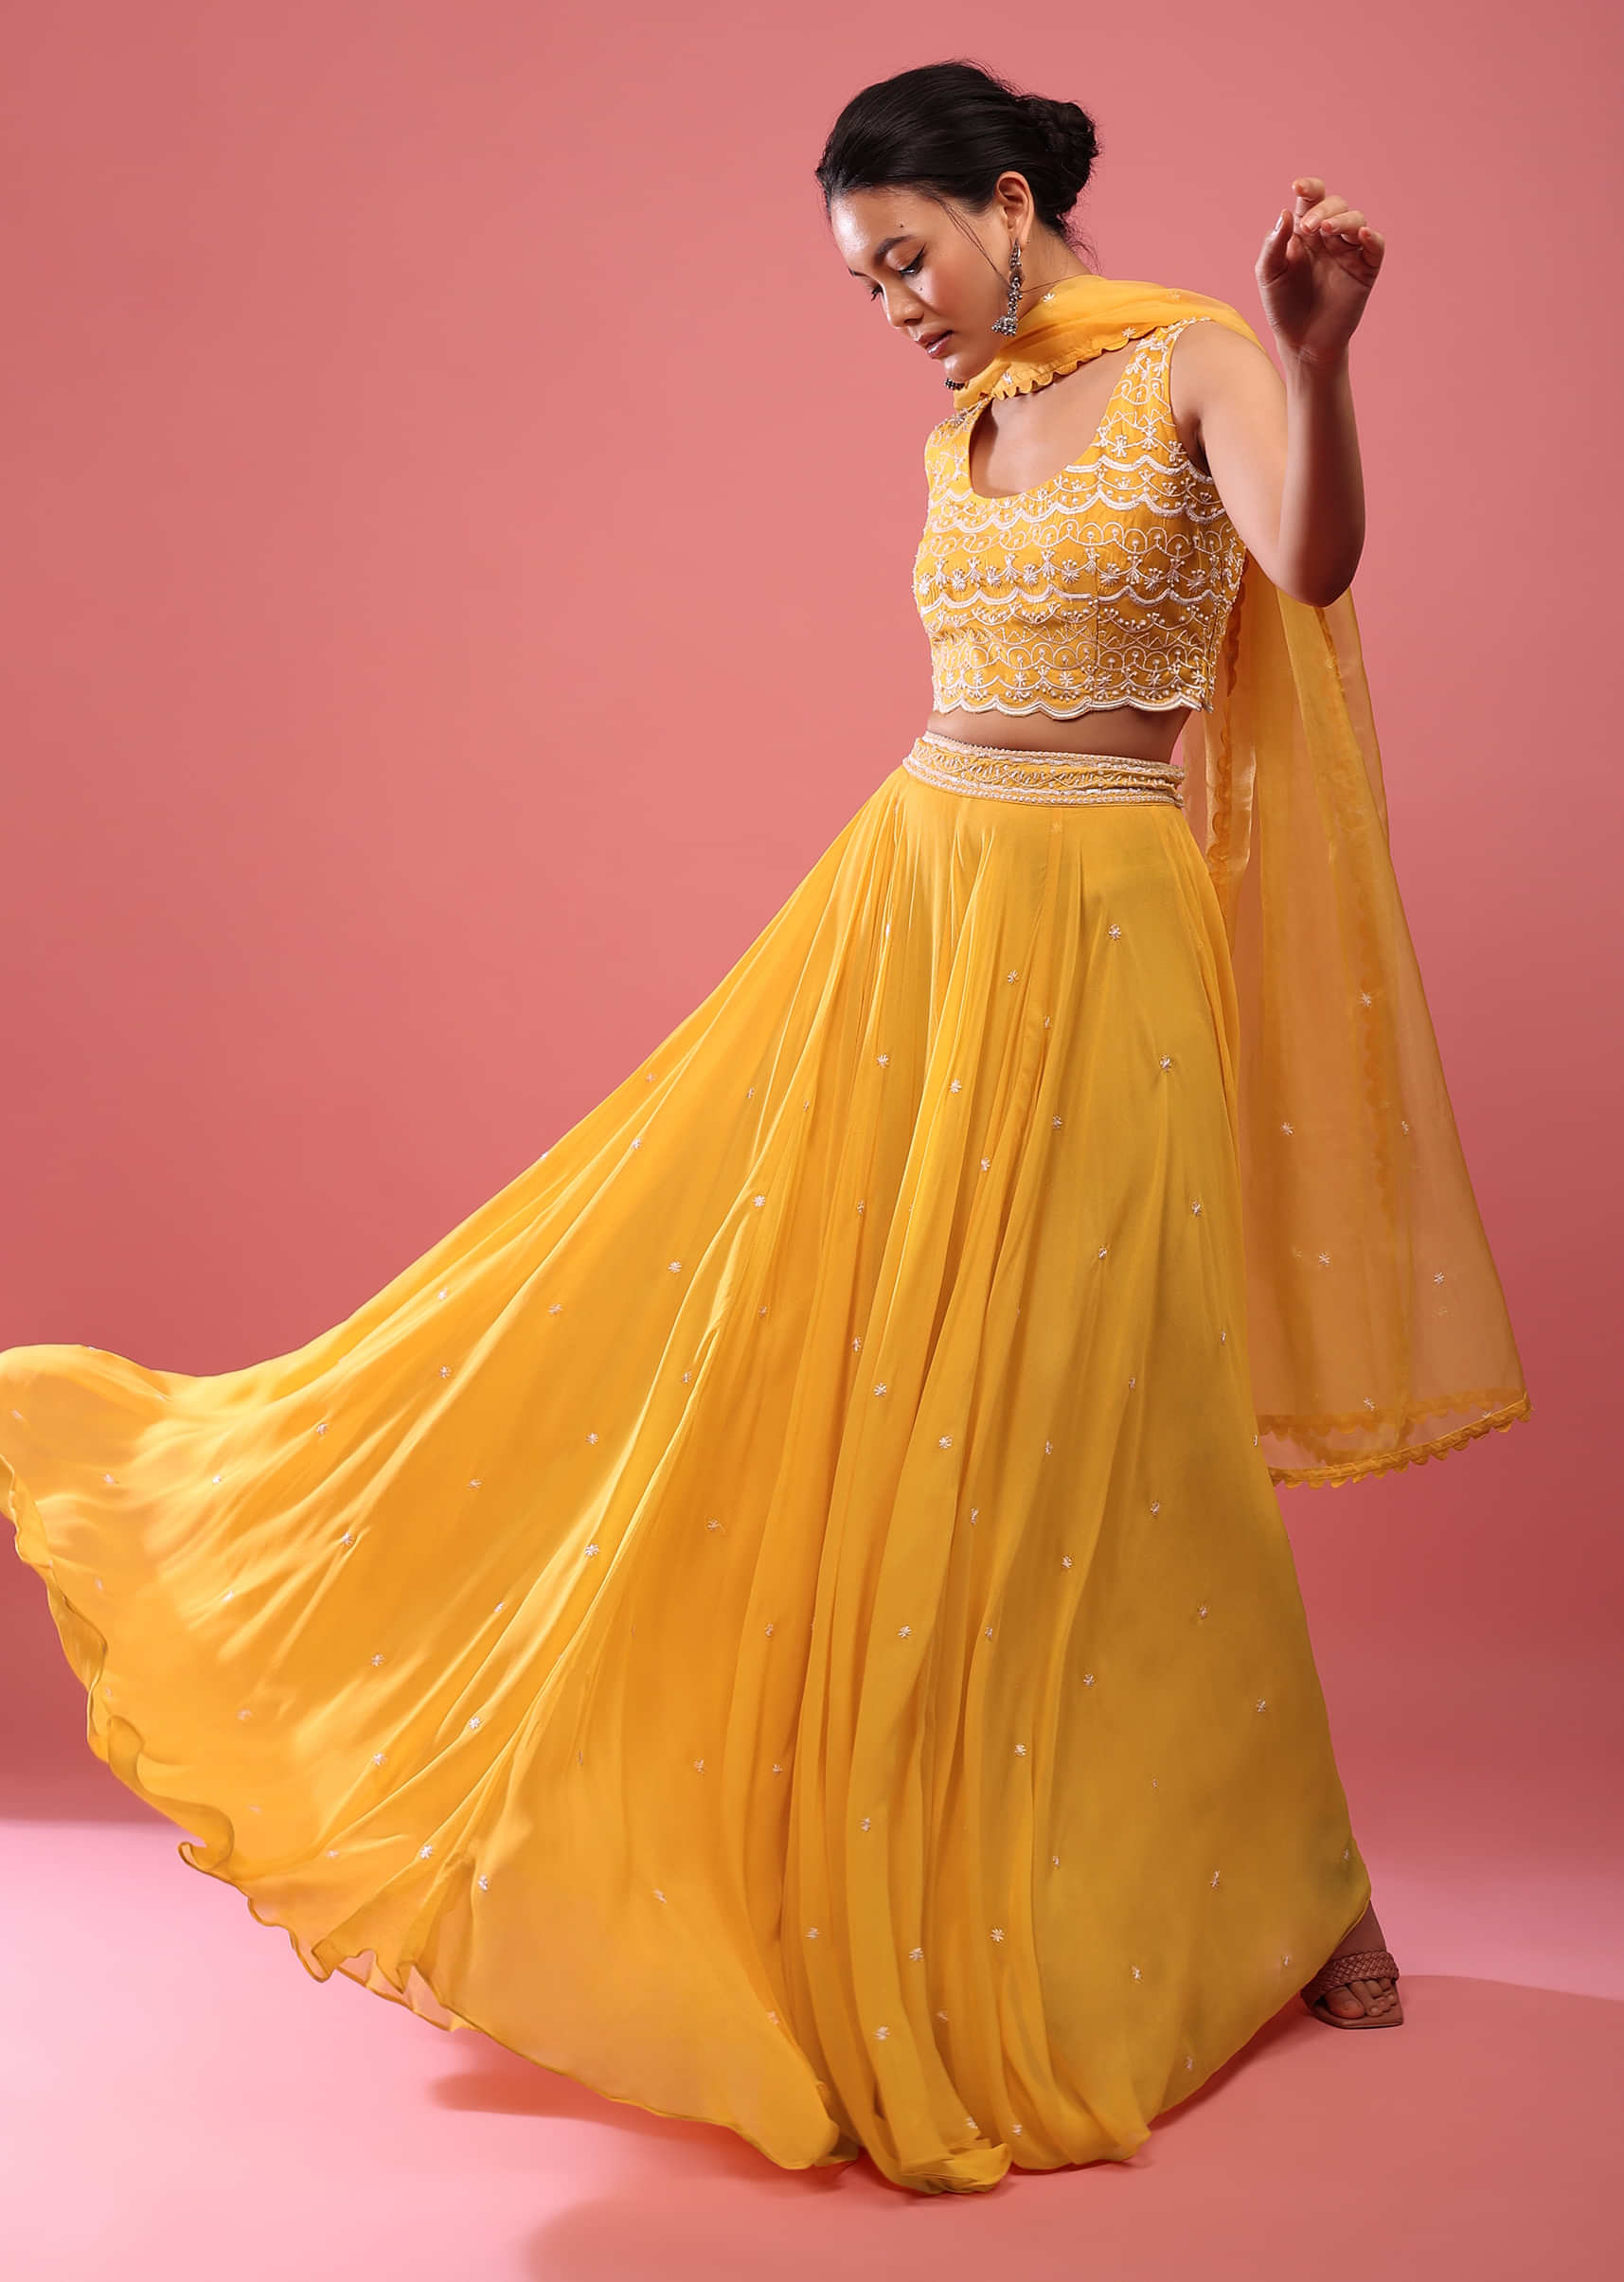 Canary Yellow Lehenga In Georgette With Fully Embroidered Blouse And Organza Dupatta